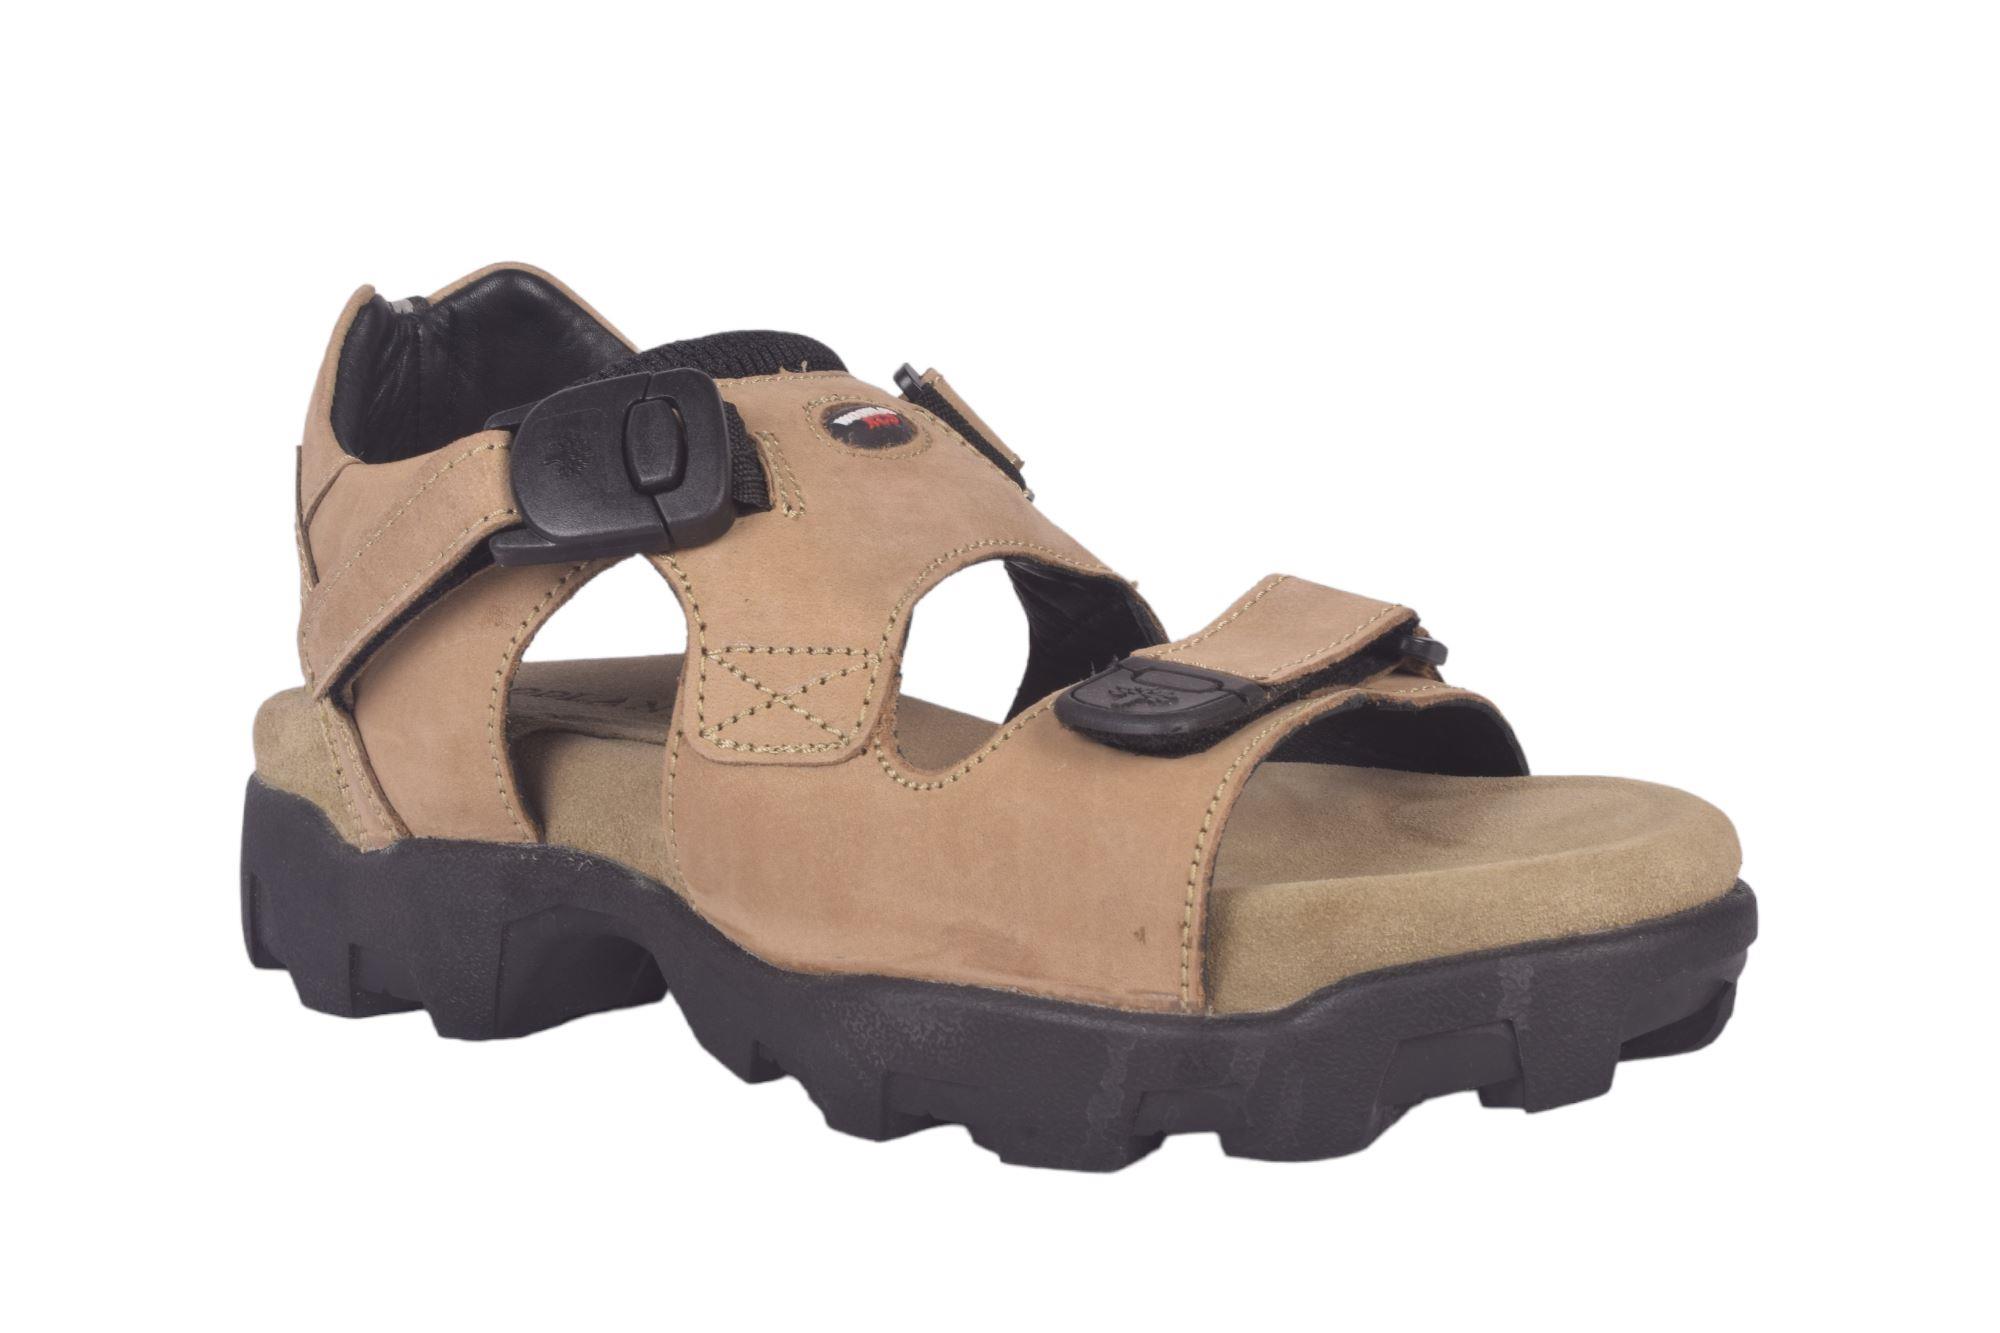 Buy Woodland Tan Floater Sandals for Men at Best Price @ Tata CLiQ